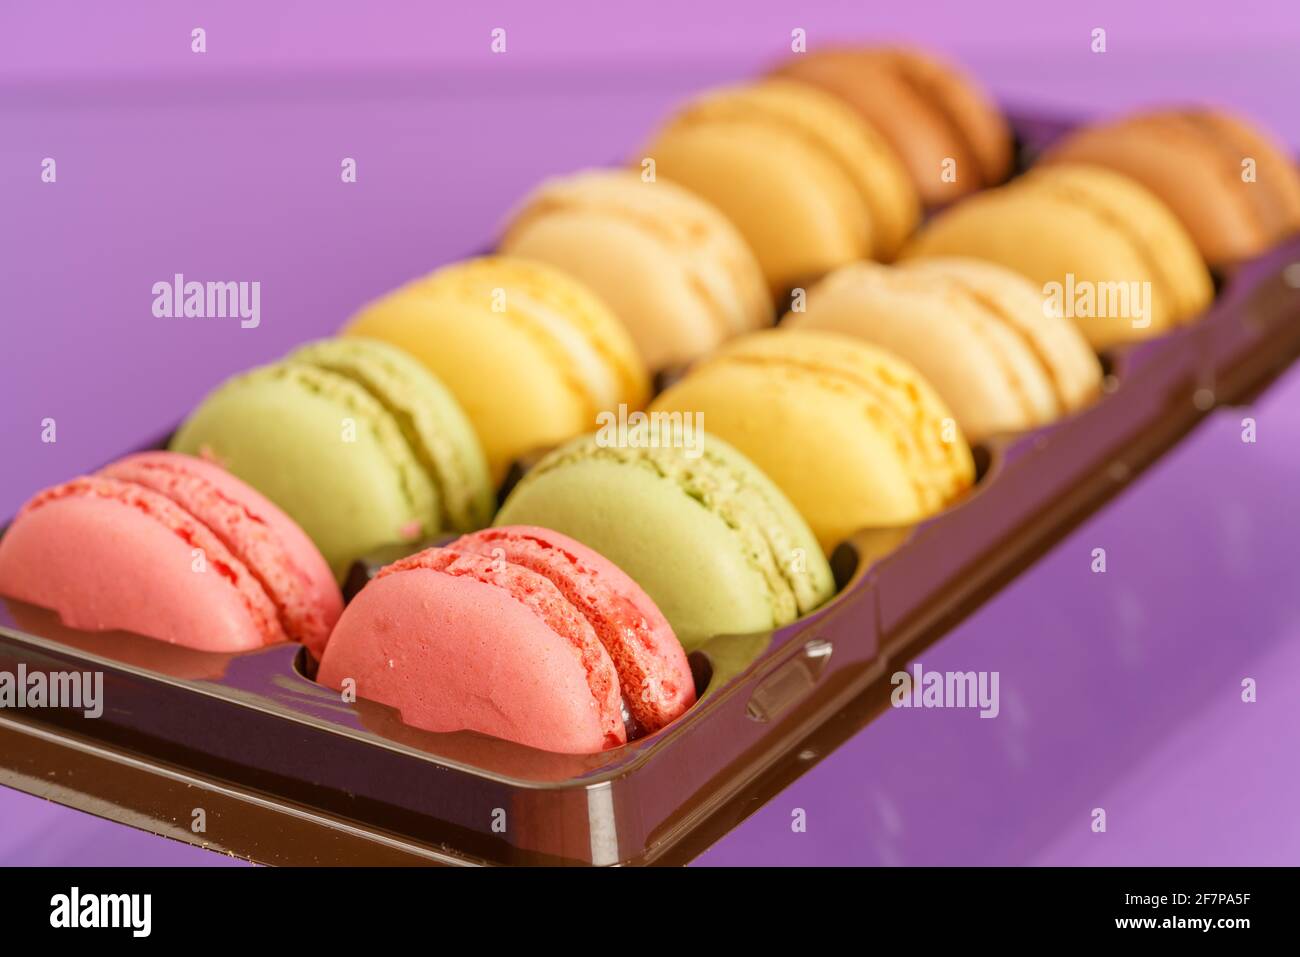 Macaron Cakes in Plastic  Package. Macaroons  Cakes in Plastic Container Stock Photo